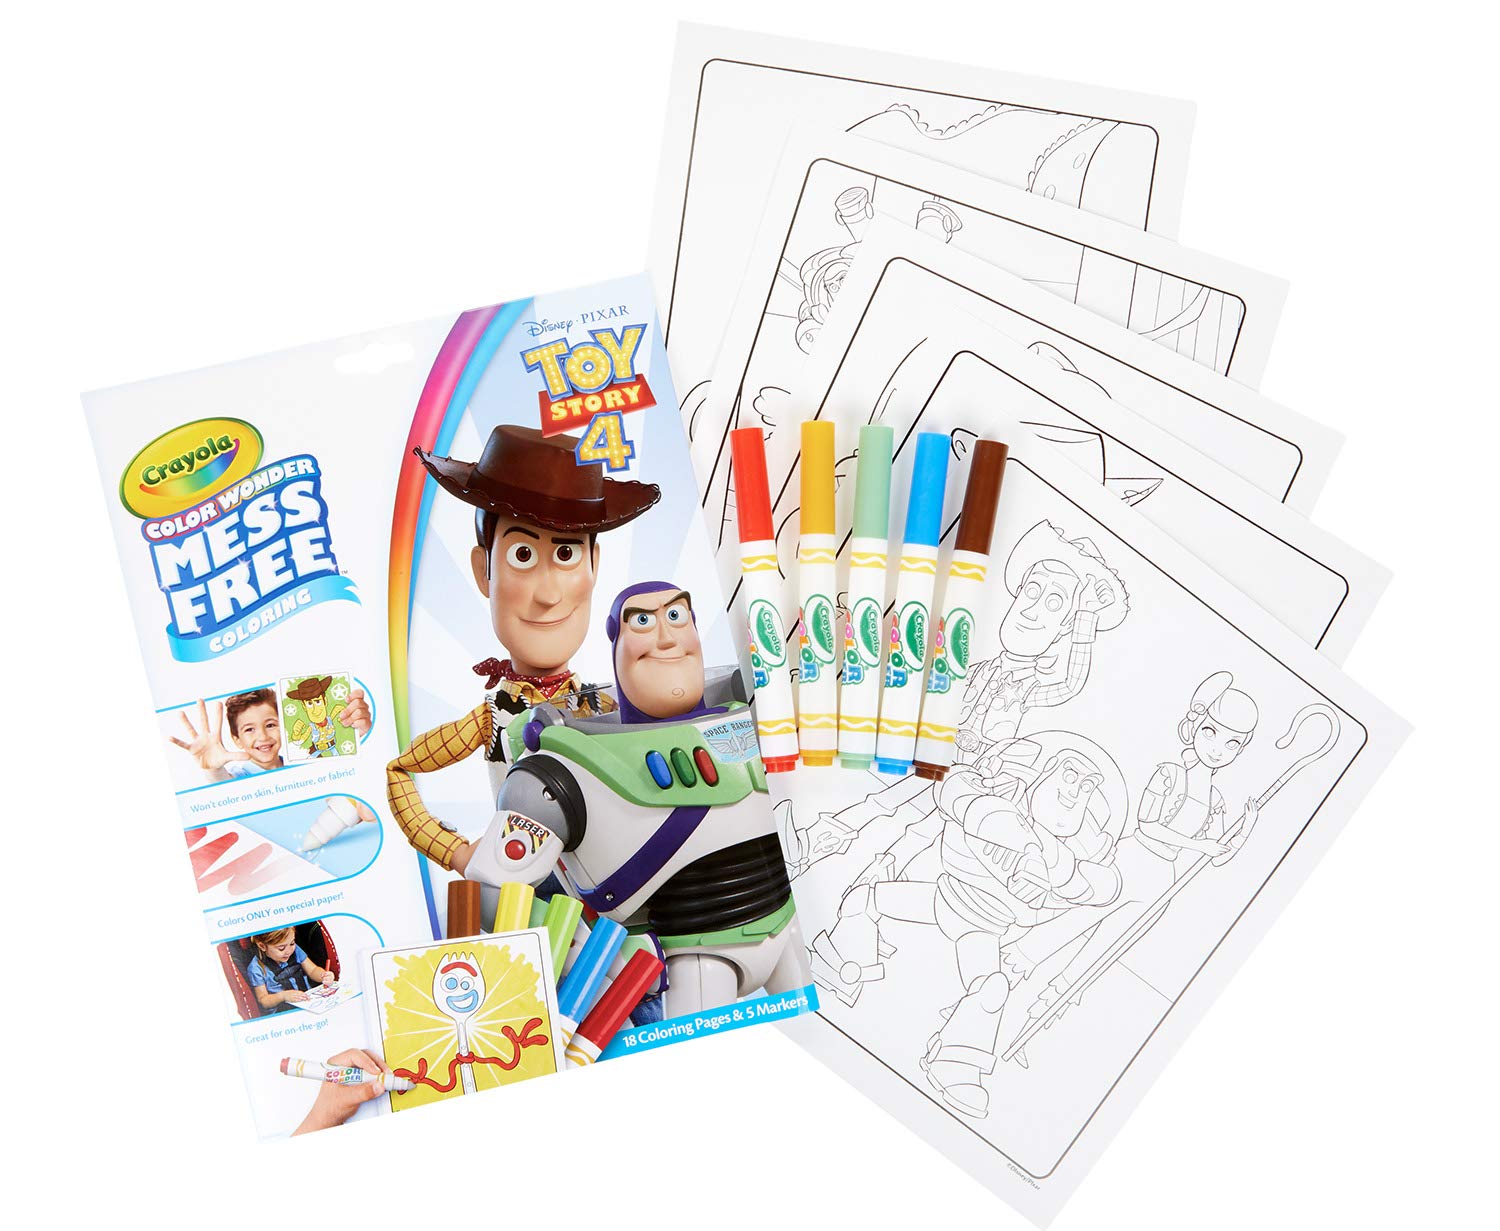 Crayola Color Wonder Toy Story 4 Coloring Book Pages & Markers Set